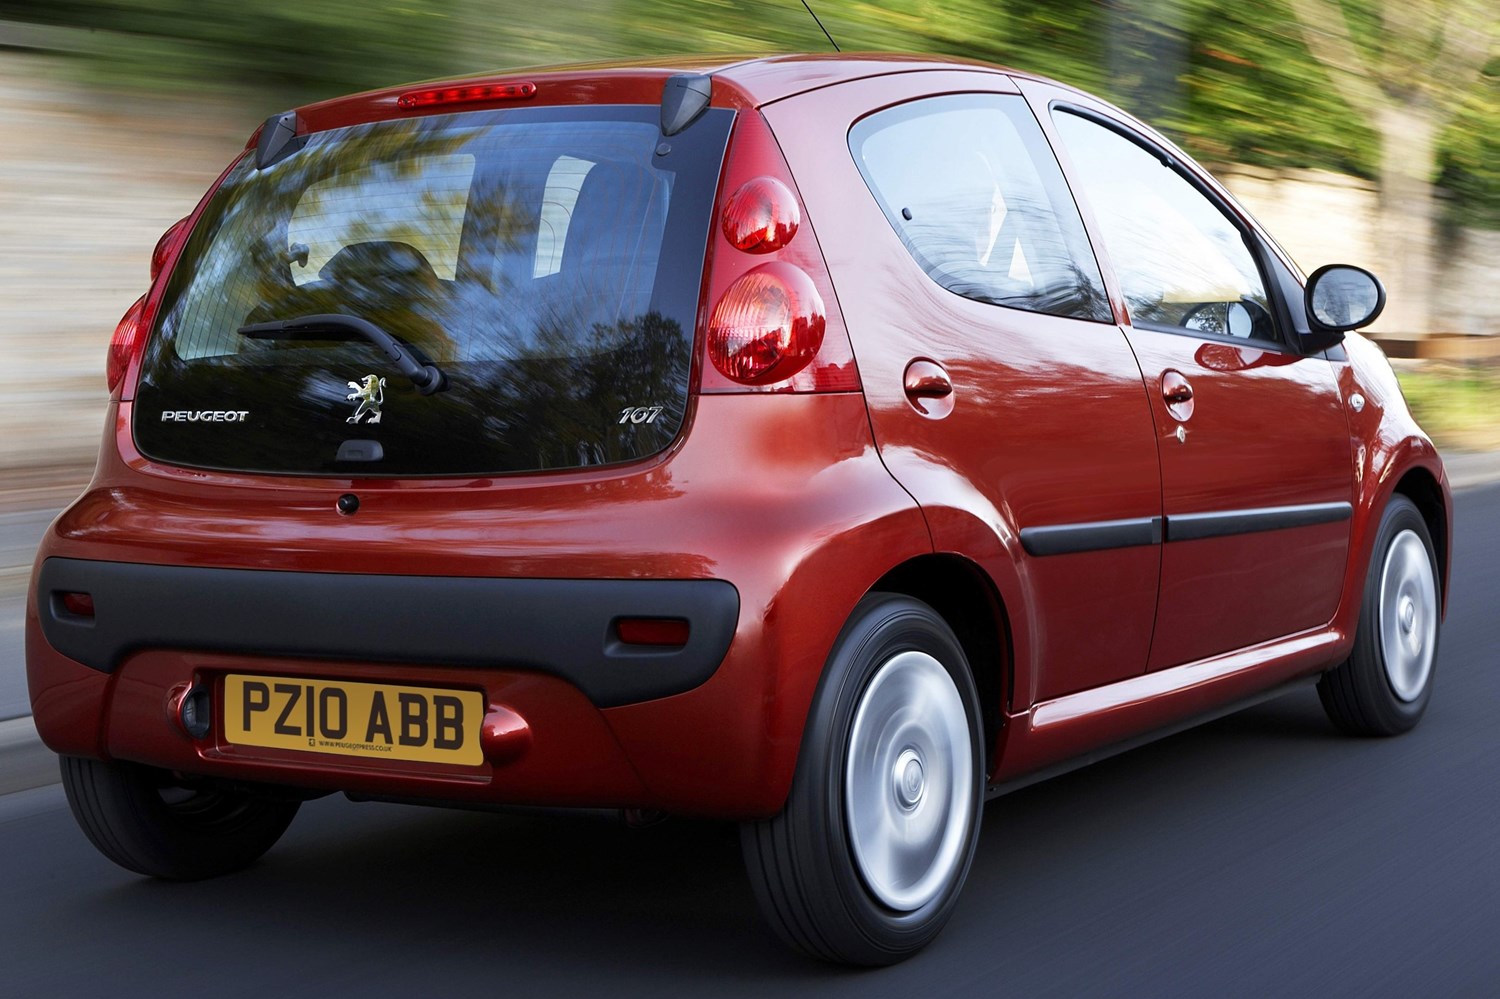 The Peugeot 107 is the smallest vehicle produced by Peugeot and